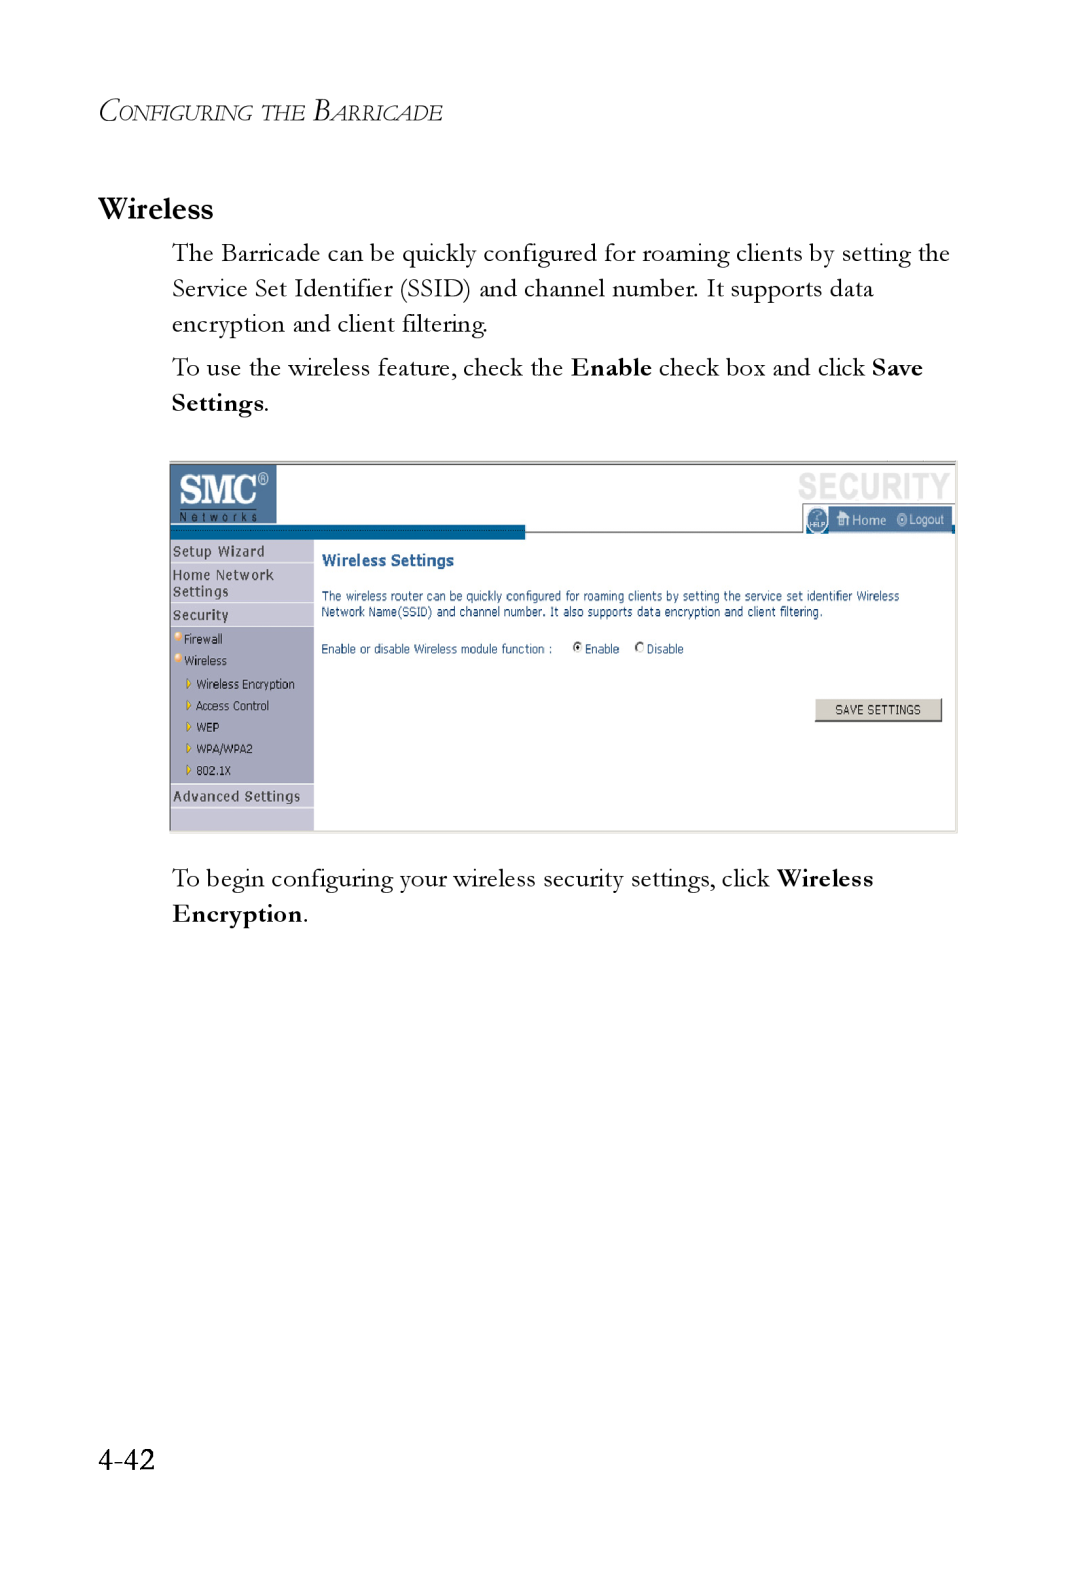 SMC Networks SMCWBR14T-G manual 4-42, Wireless, Configuring The Barricade 